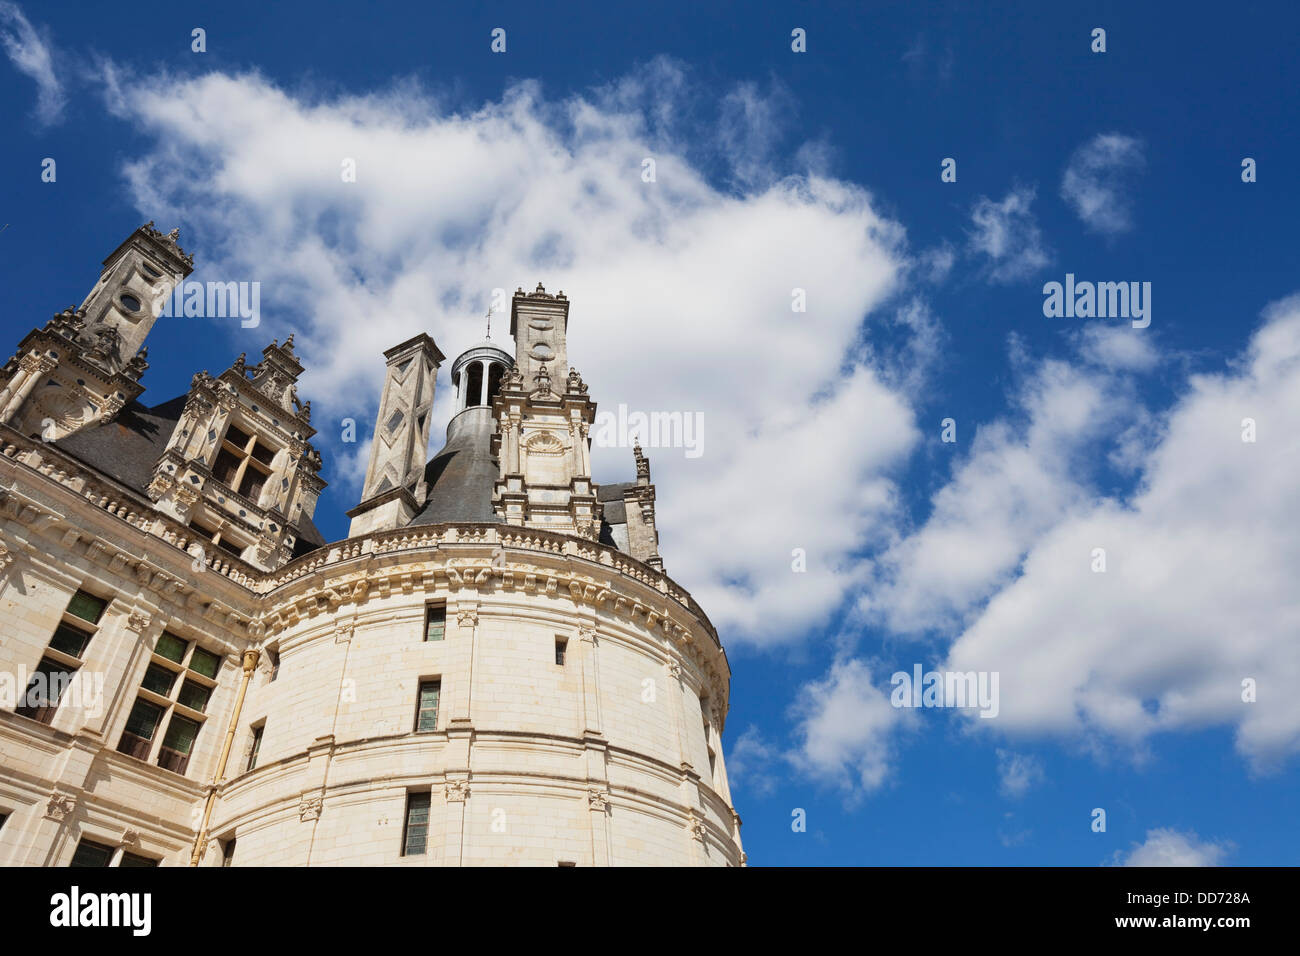 France, View of Chateau of Chambord Stock Photo